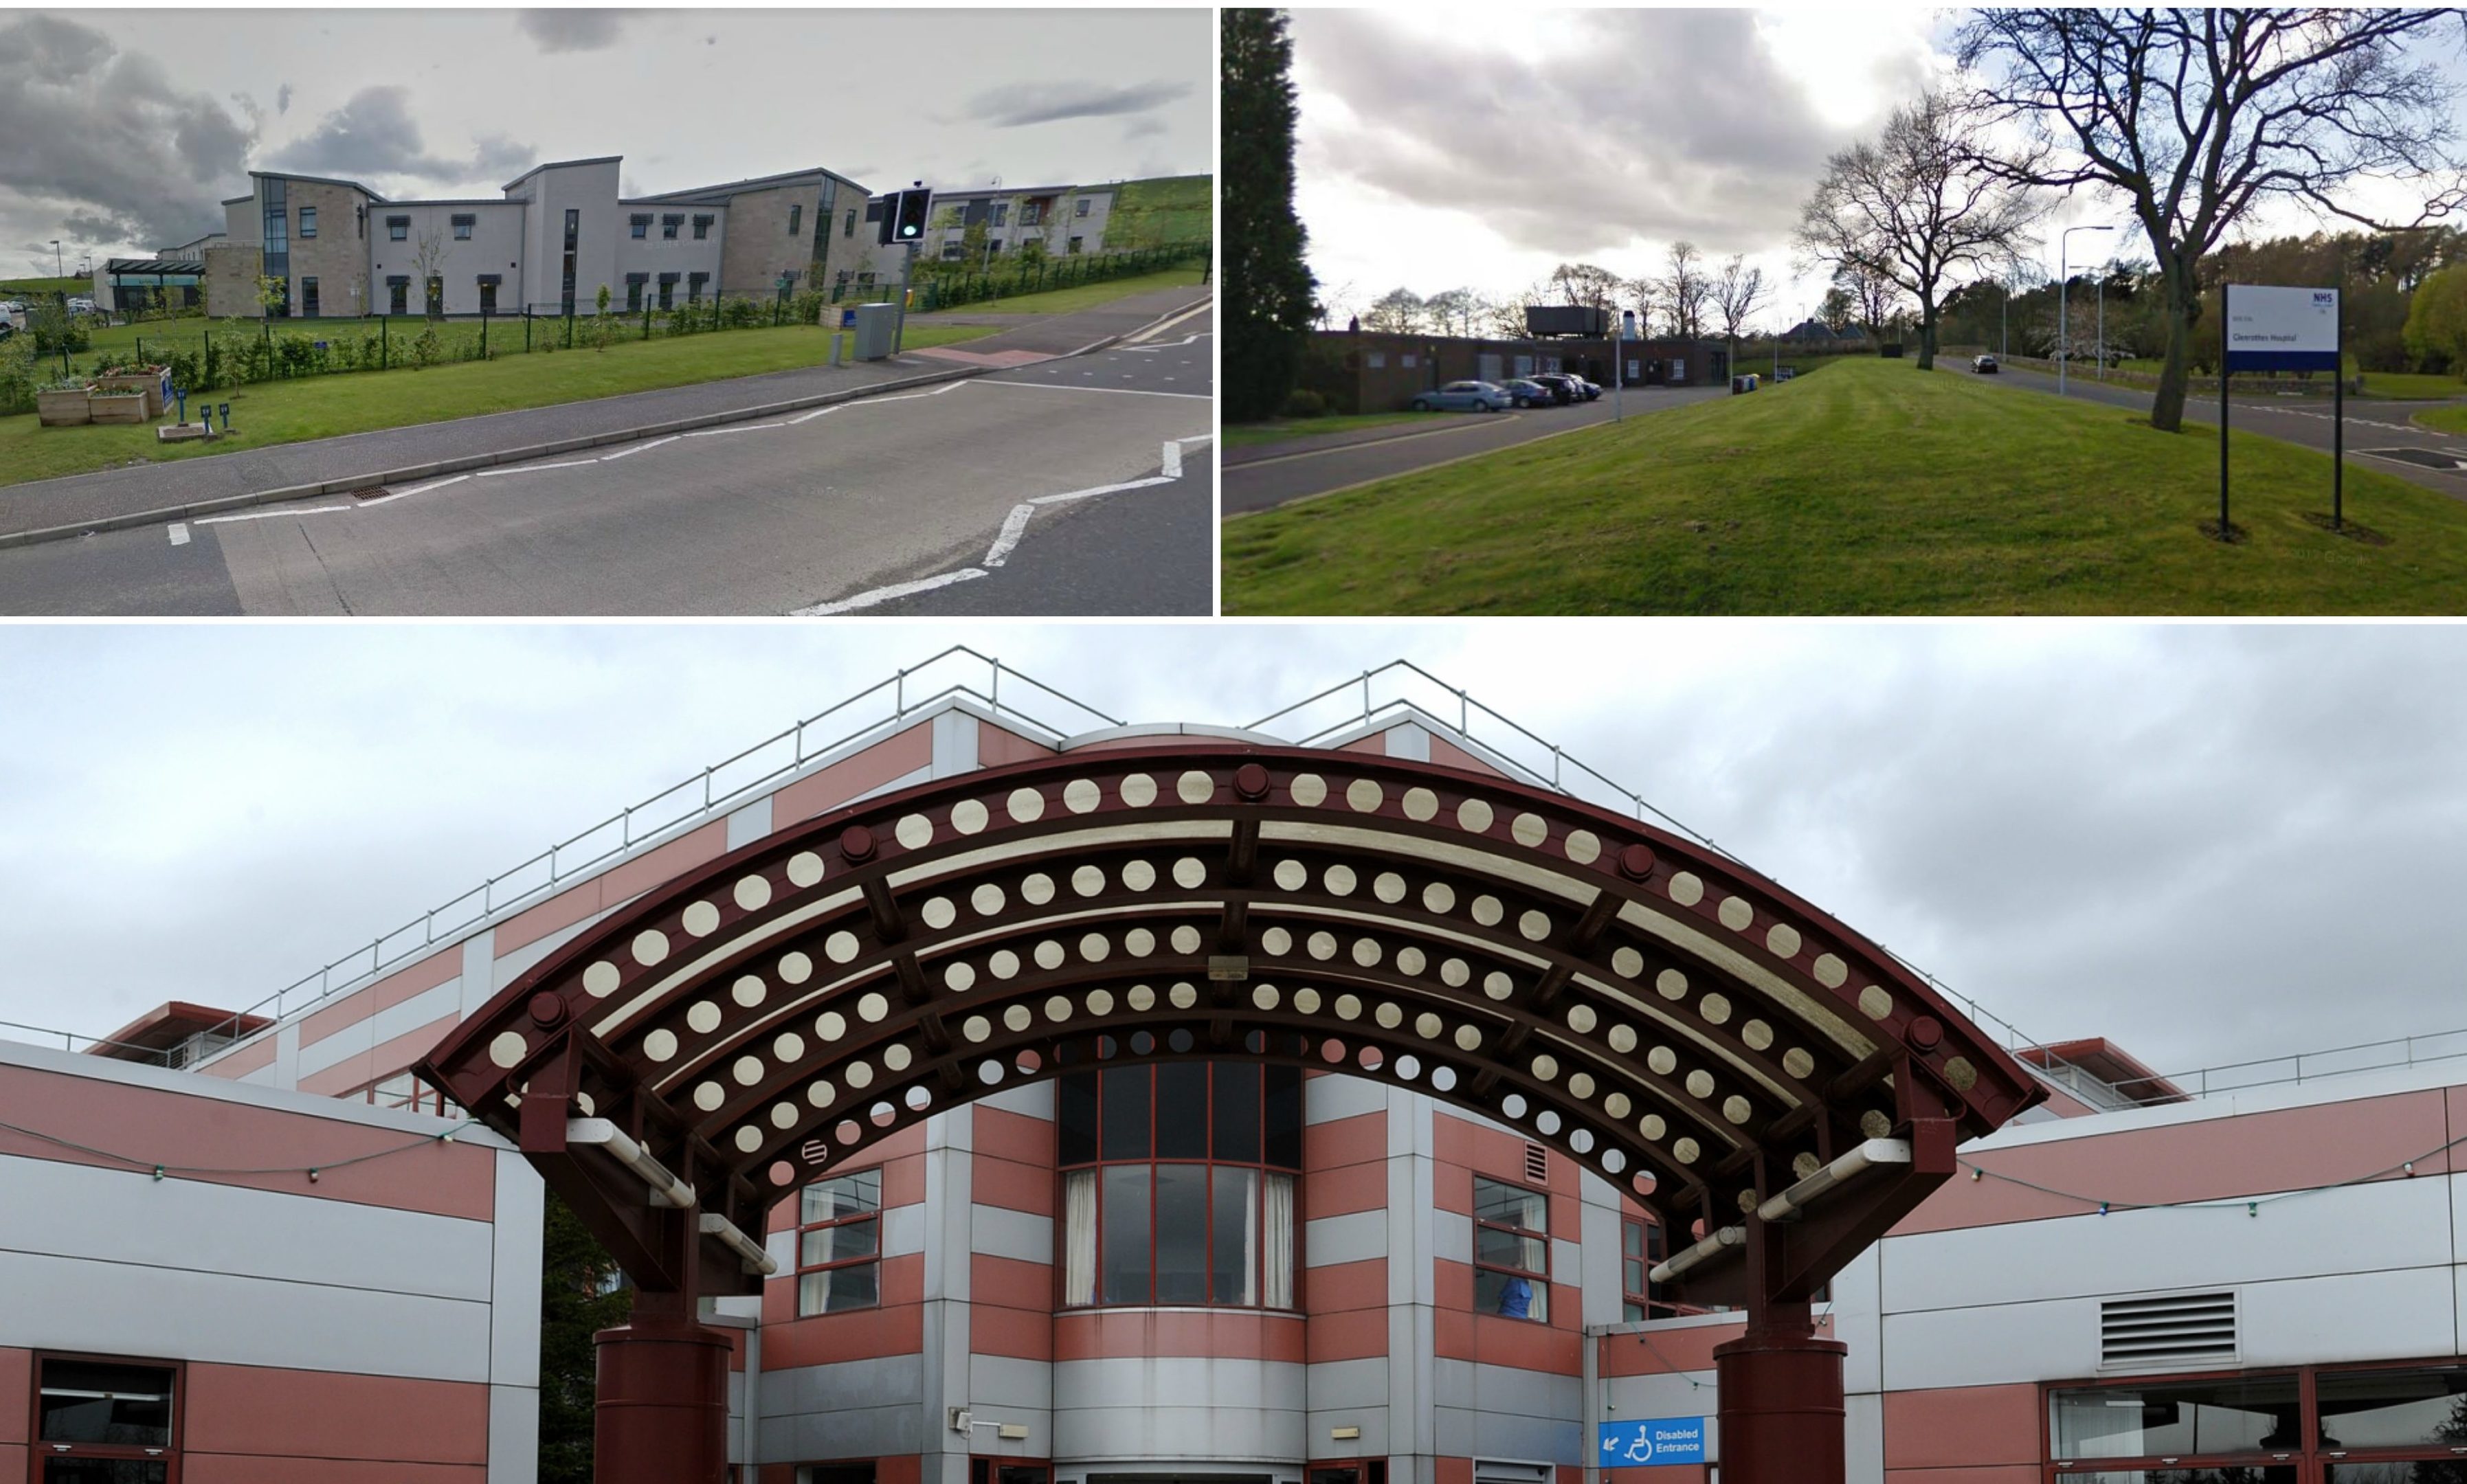 St Andrews, Glenrothes and Queen Margaret hospitals.